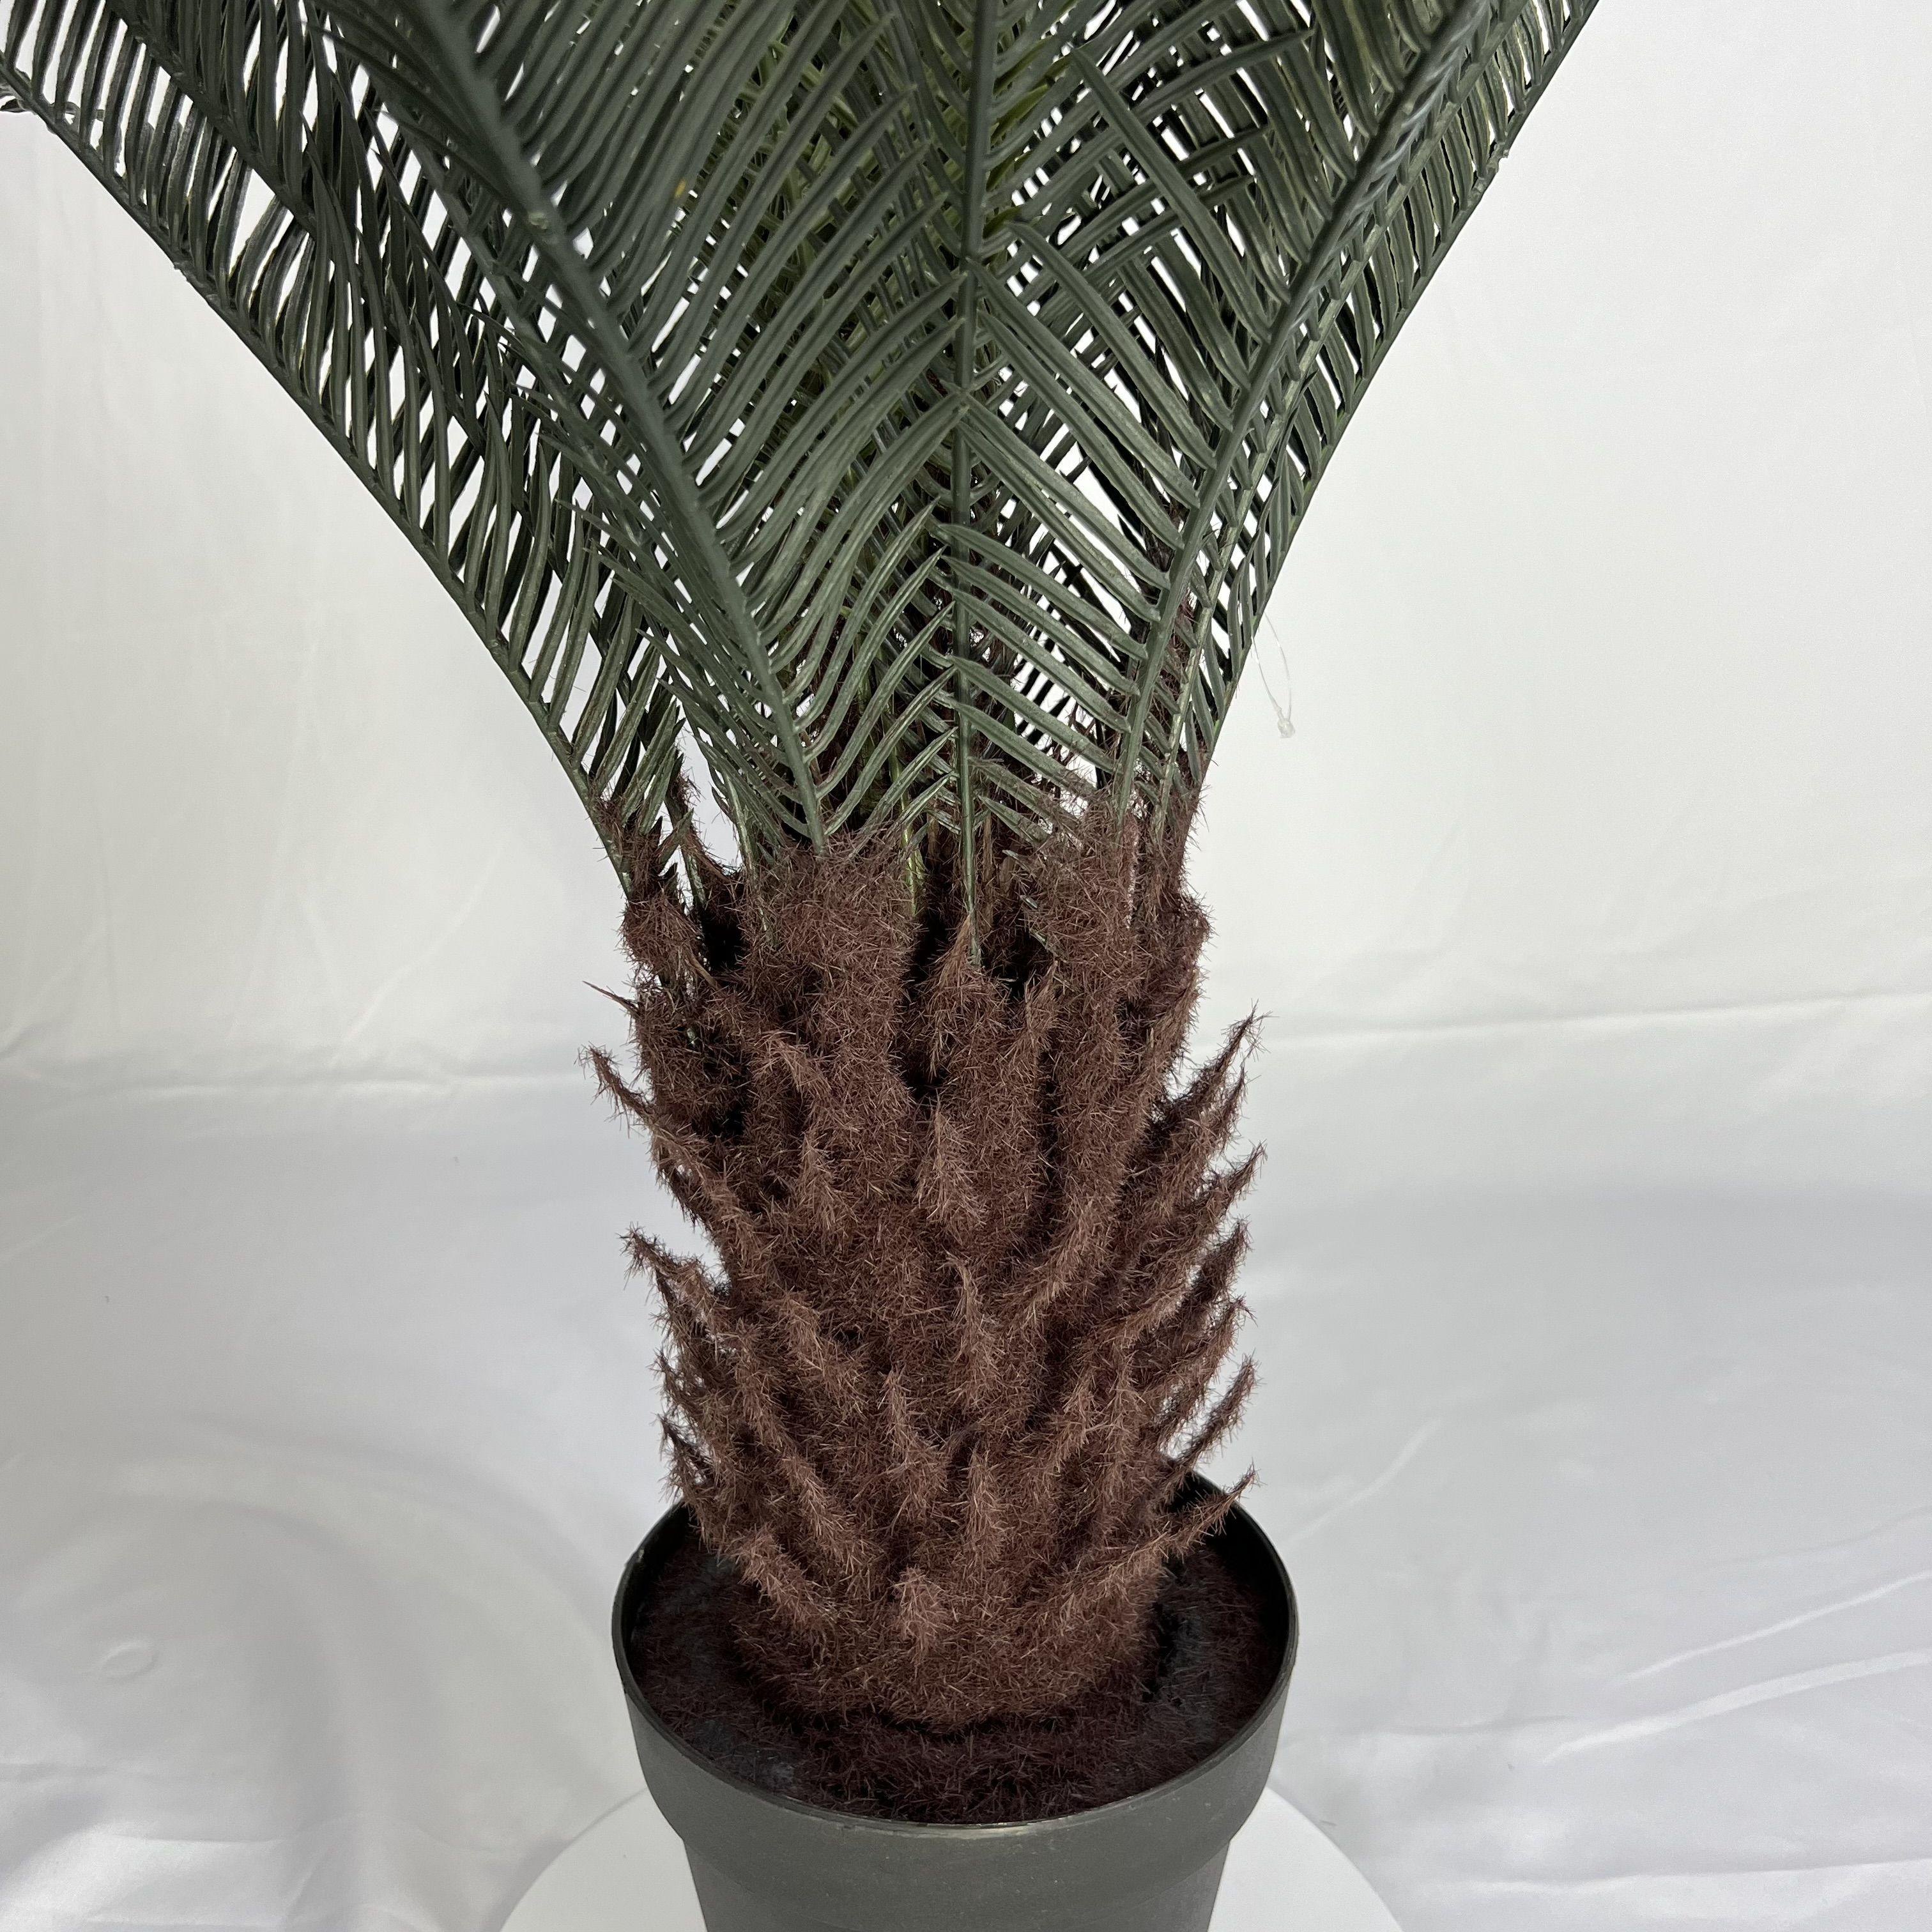 Artificial decorative plant height 80 cm - type. 1